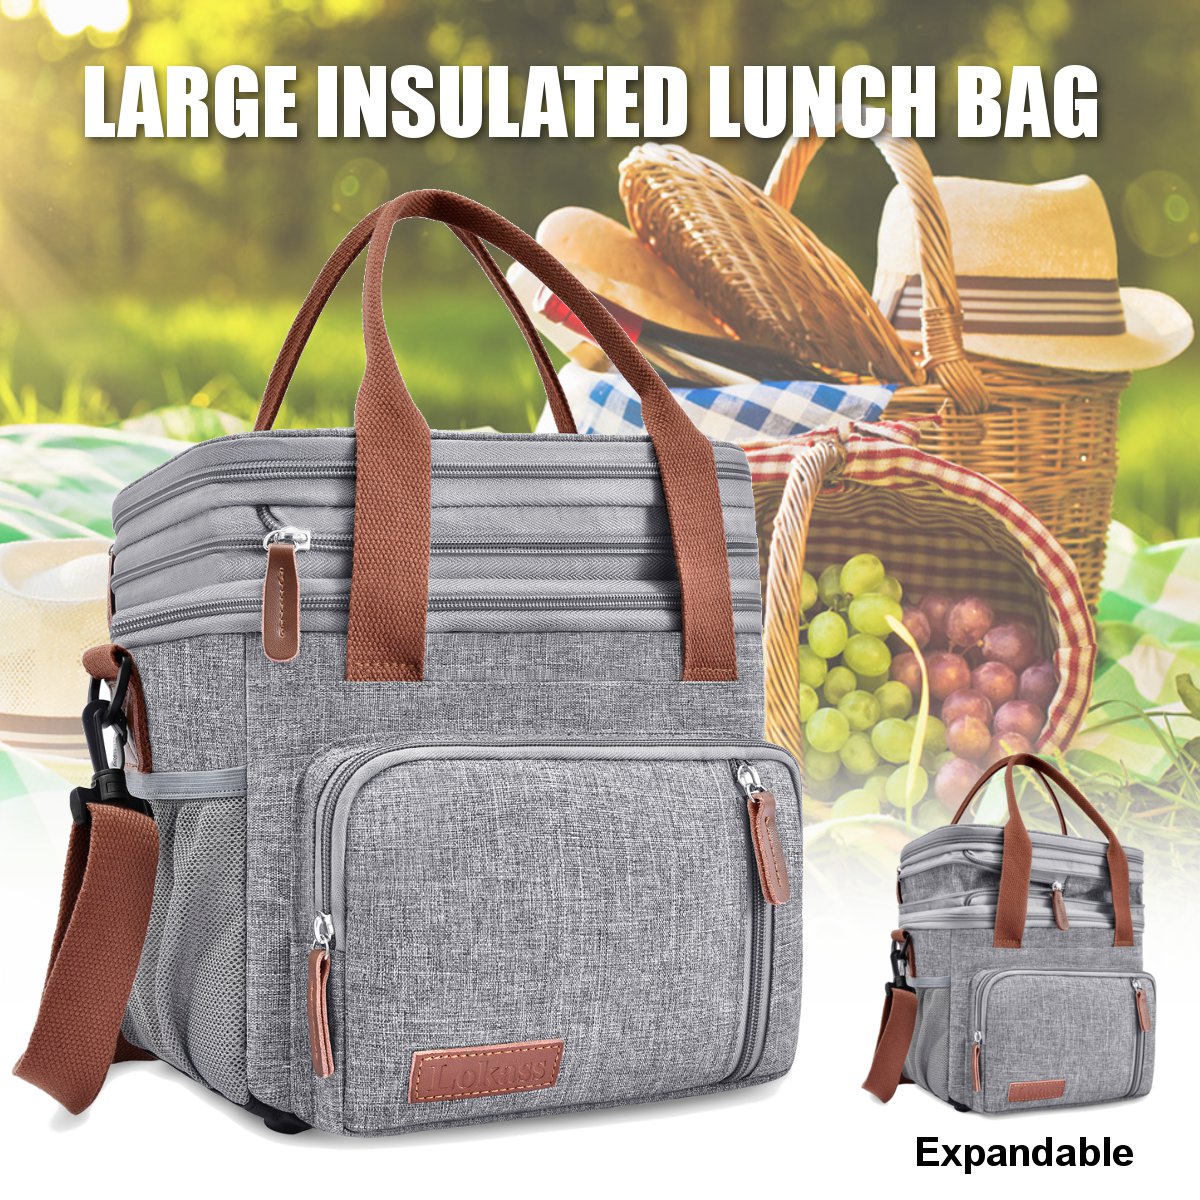 Expandable-Large-Capacity-with-Multiple-Pockets-Leak-proof-Drinks-Lunch-Insulated-Bag-Picnic-Storage-1863622-1